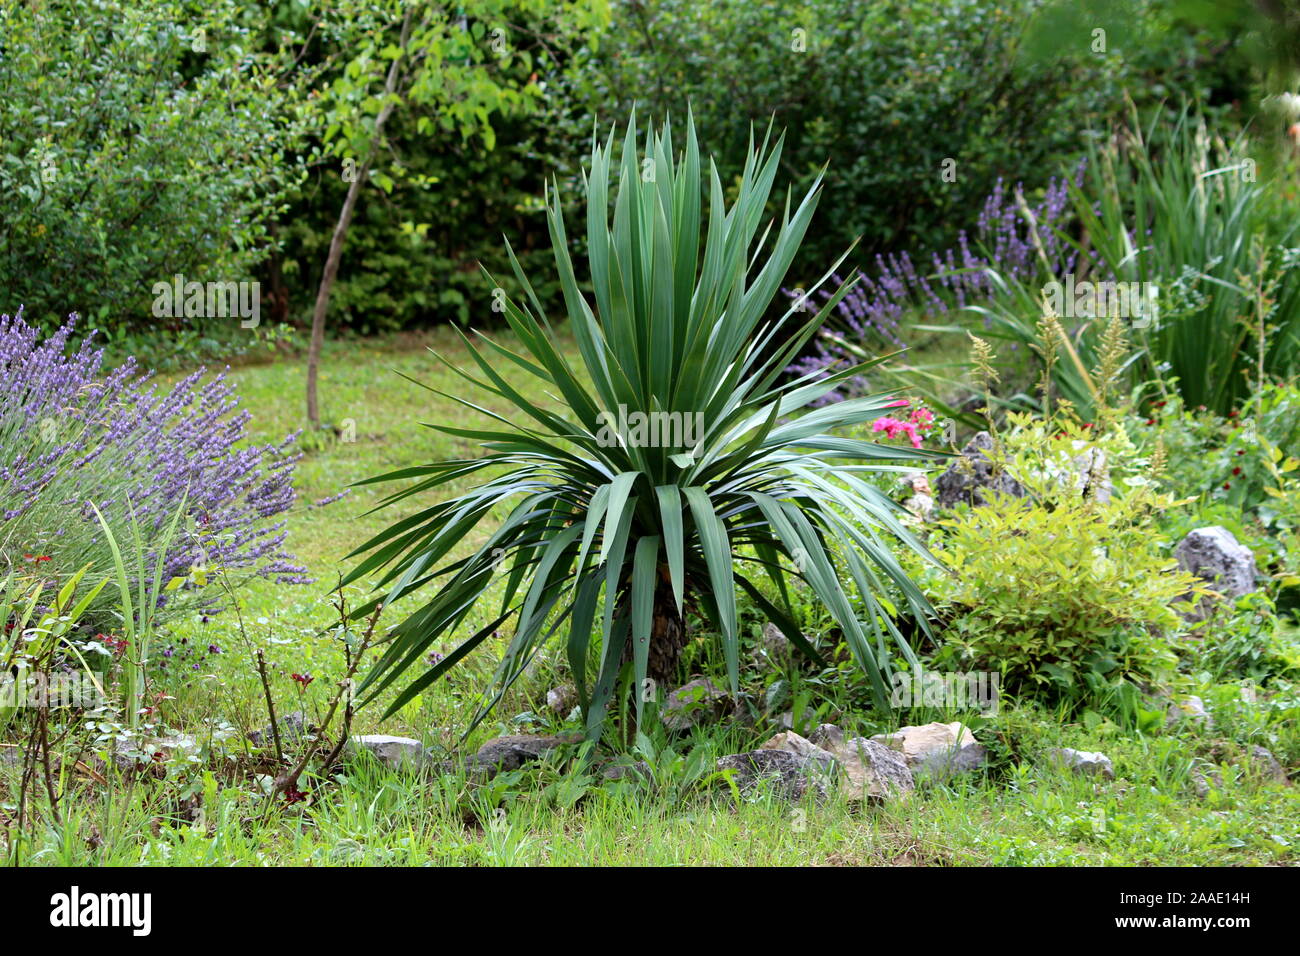 Yucca perennial tree plant with long evergreen tough sword shaped leaves growing in local home garden surrounded with uncut grass and other plants Stock Photo